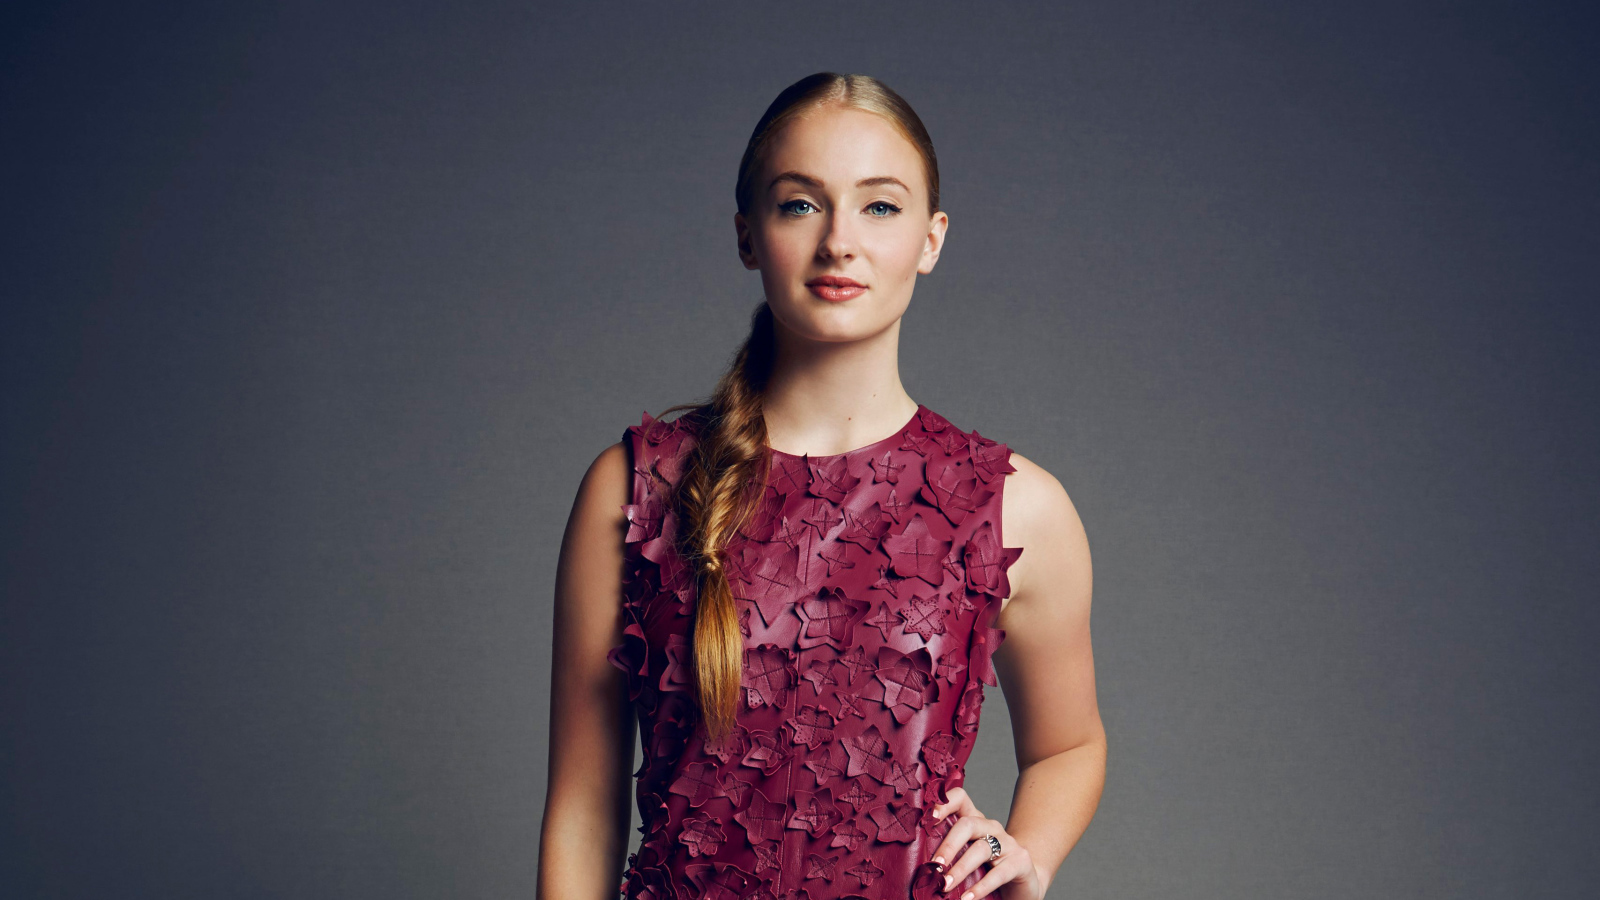 Actress Sophie Turner in a beautiful dress on a gray background